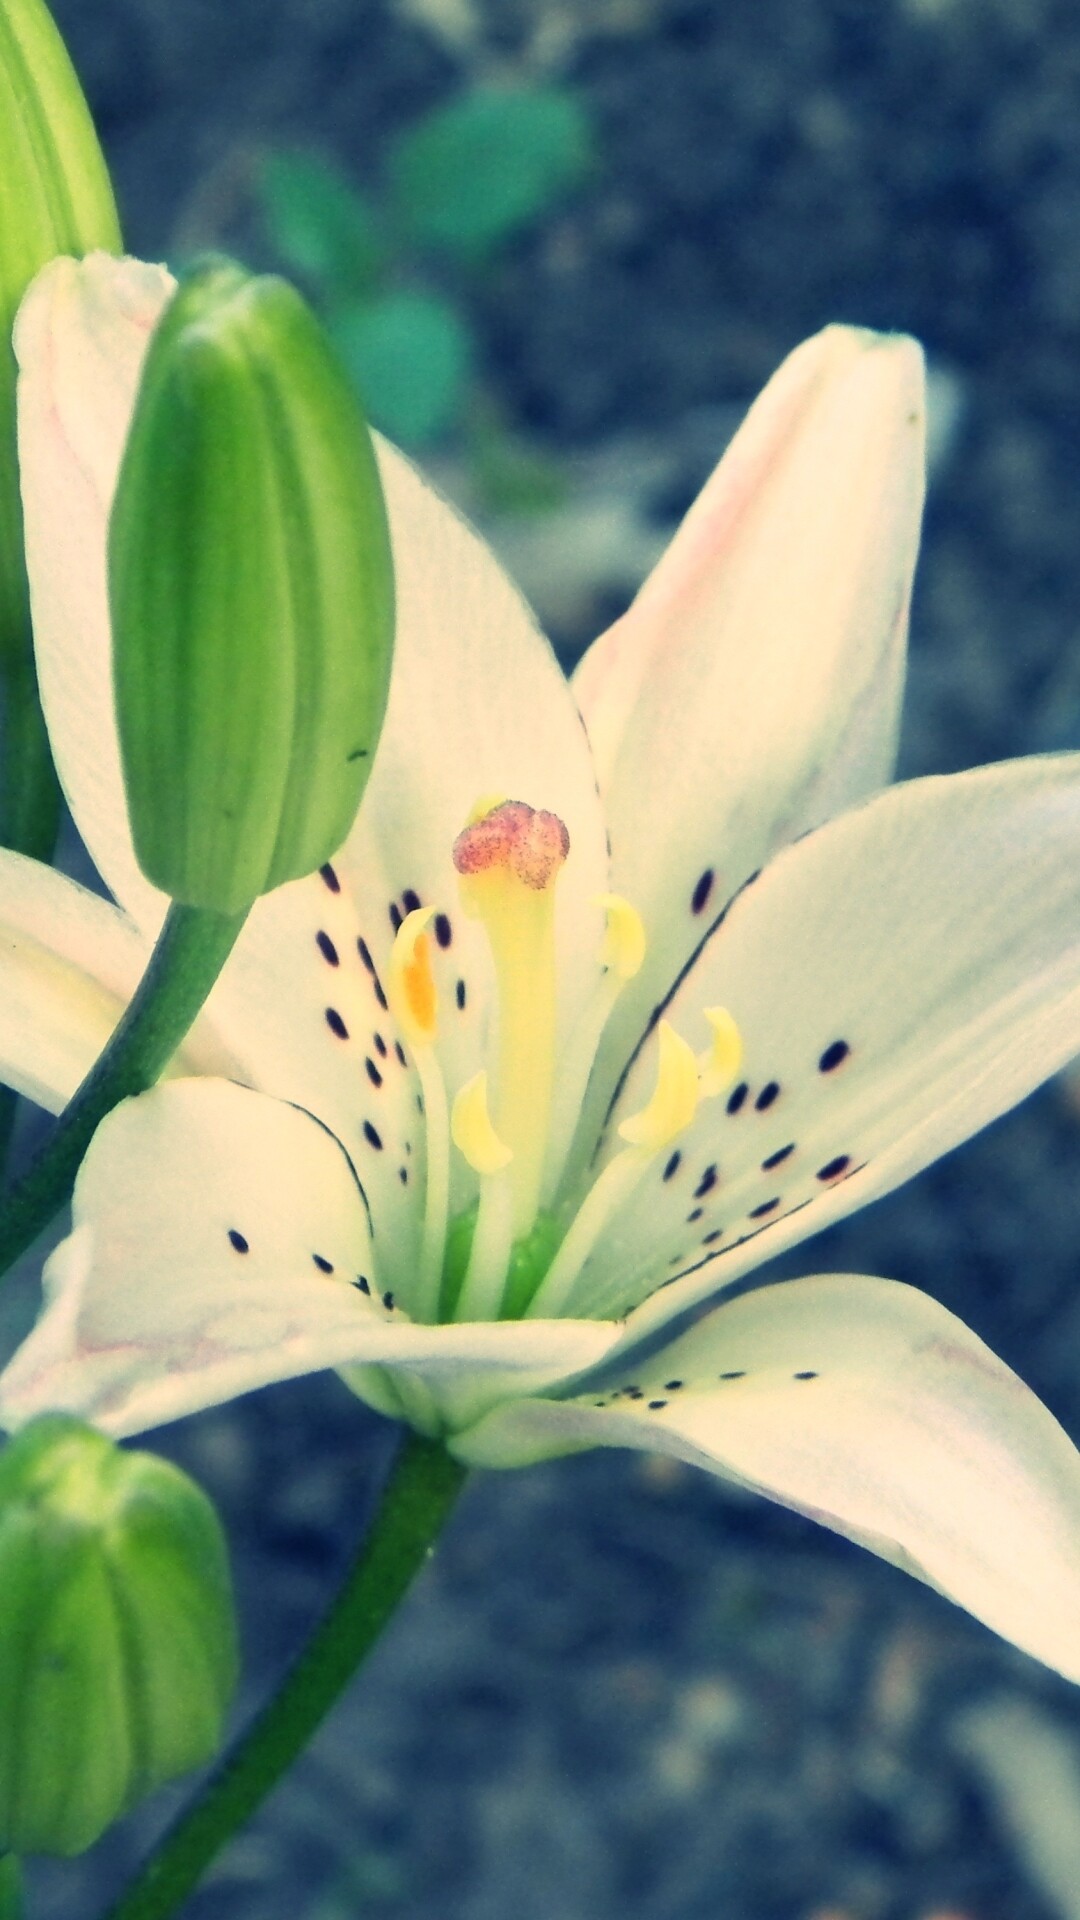 Lily: Lilies typically feature 6-tepaled flowers in a variety of shapes, sometimes nodding, sometimes with reflexed petals, atop stiff, unbranched stems clothed with linear to elliptic leaves. 1080x1920 Full HD Wallpaper.